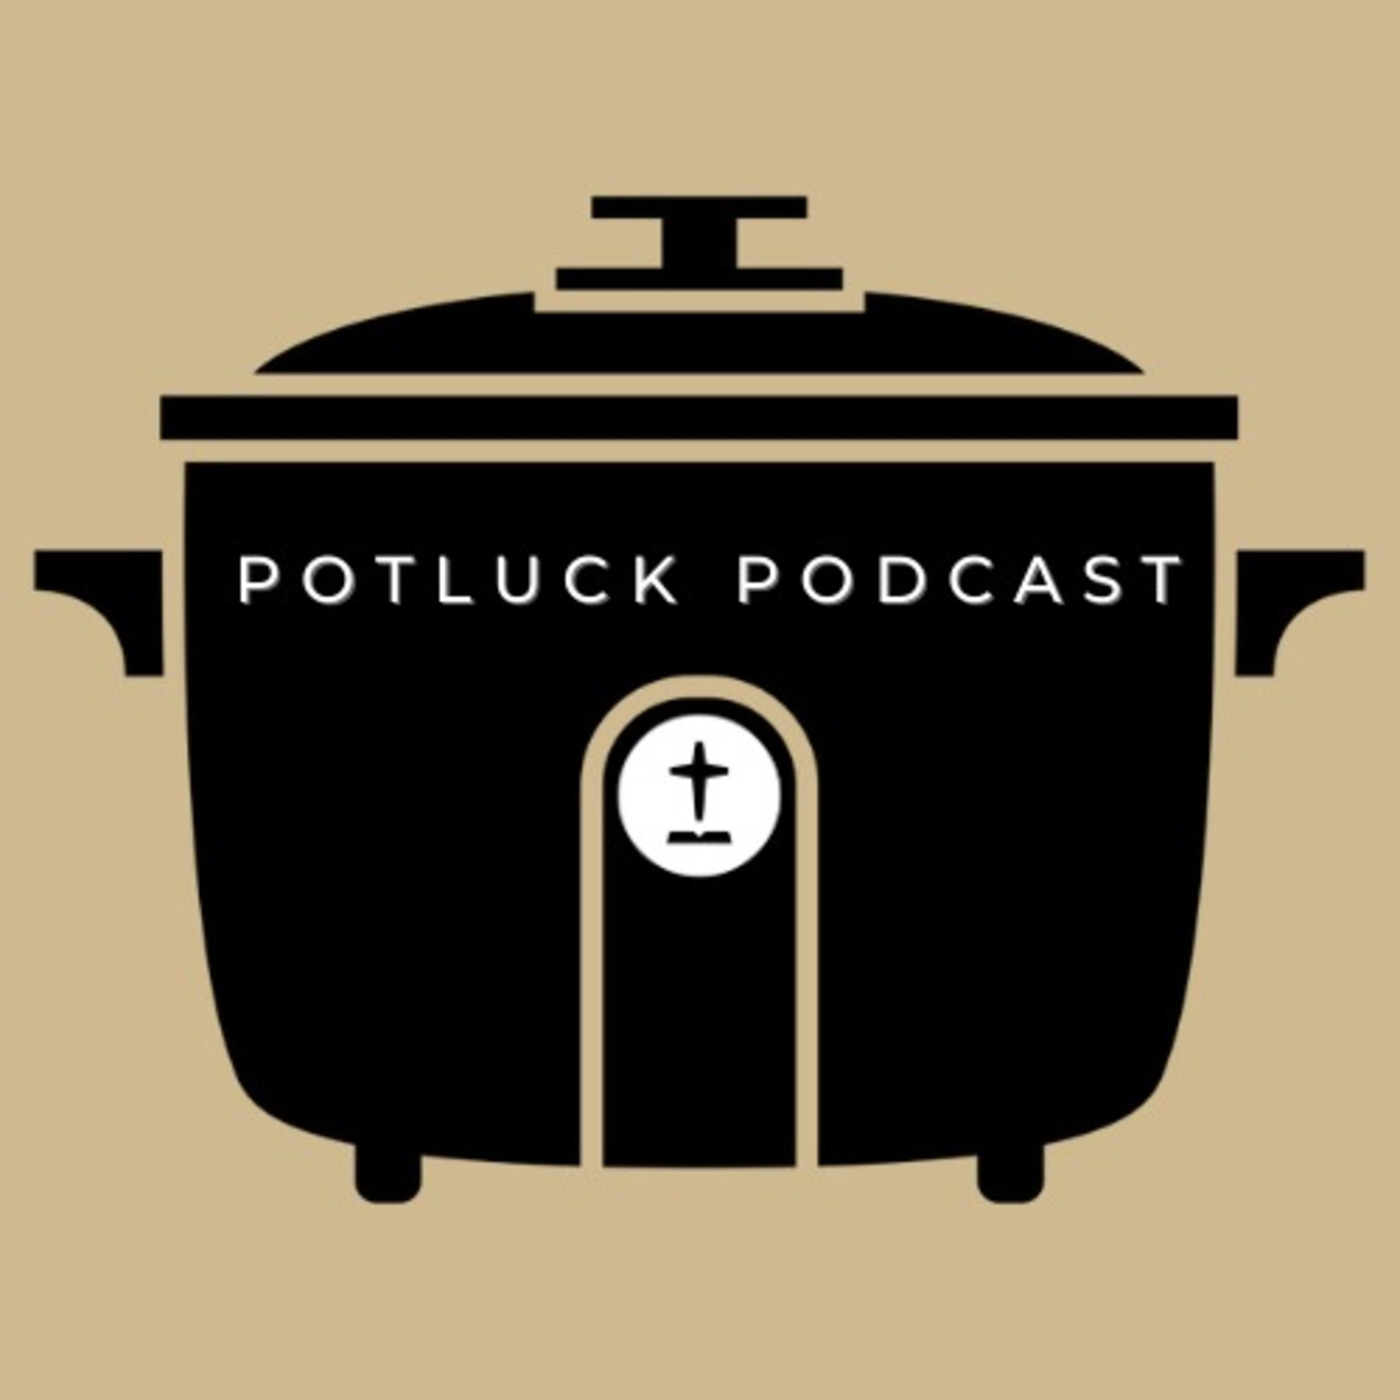 Episode 314: POTLUCK PODCAST 212: SWBTS/IMB News, Banning the Bible, and Football Pick’em